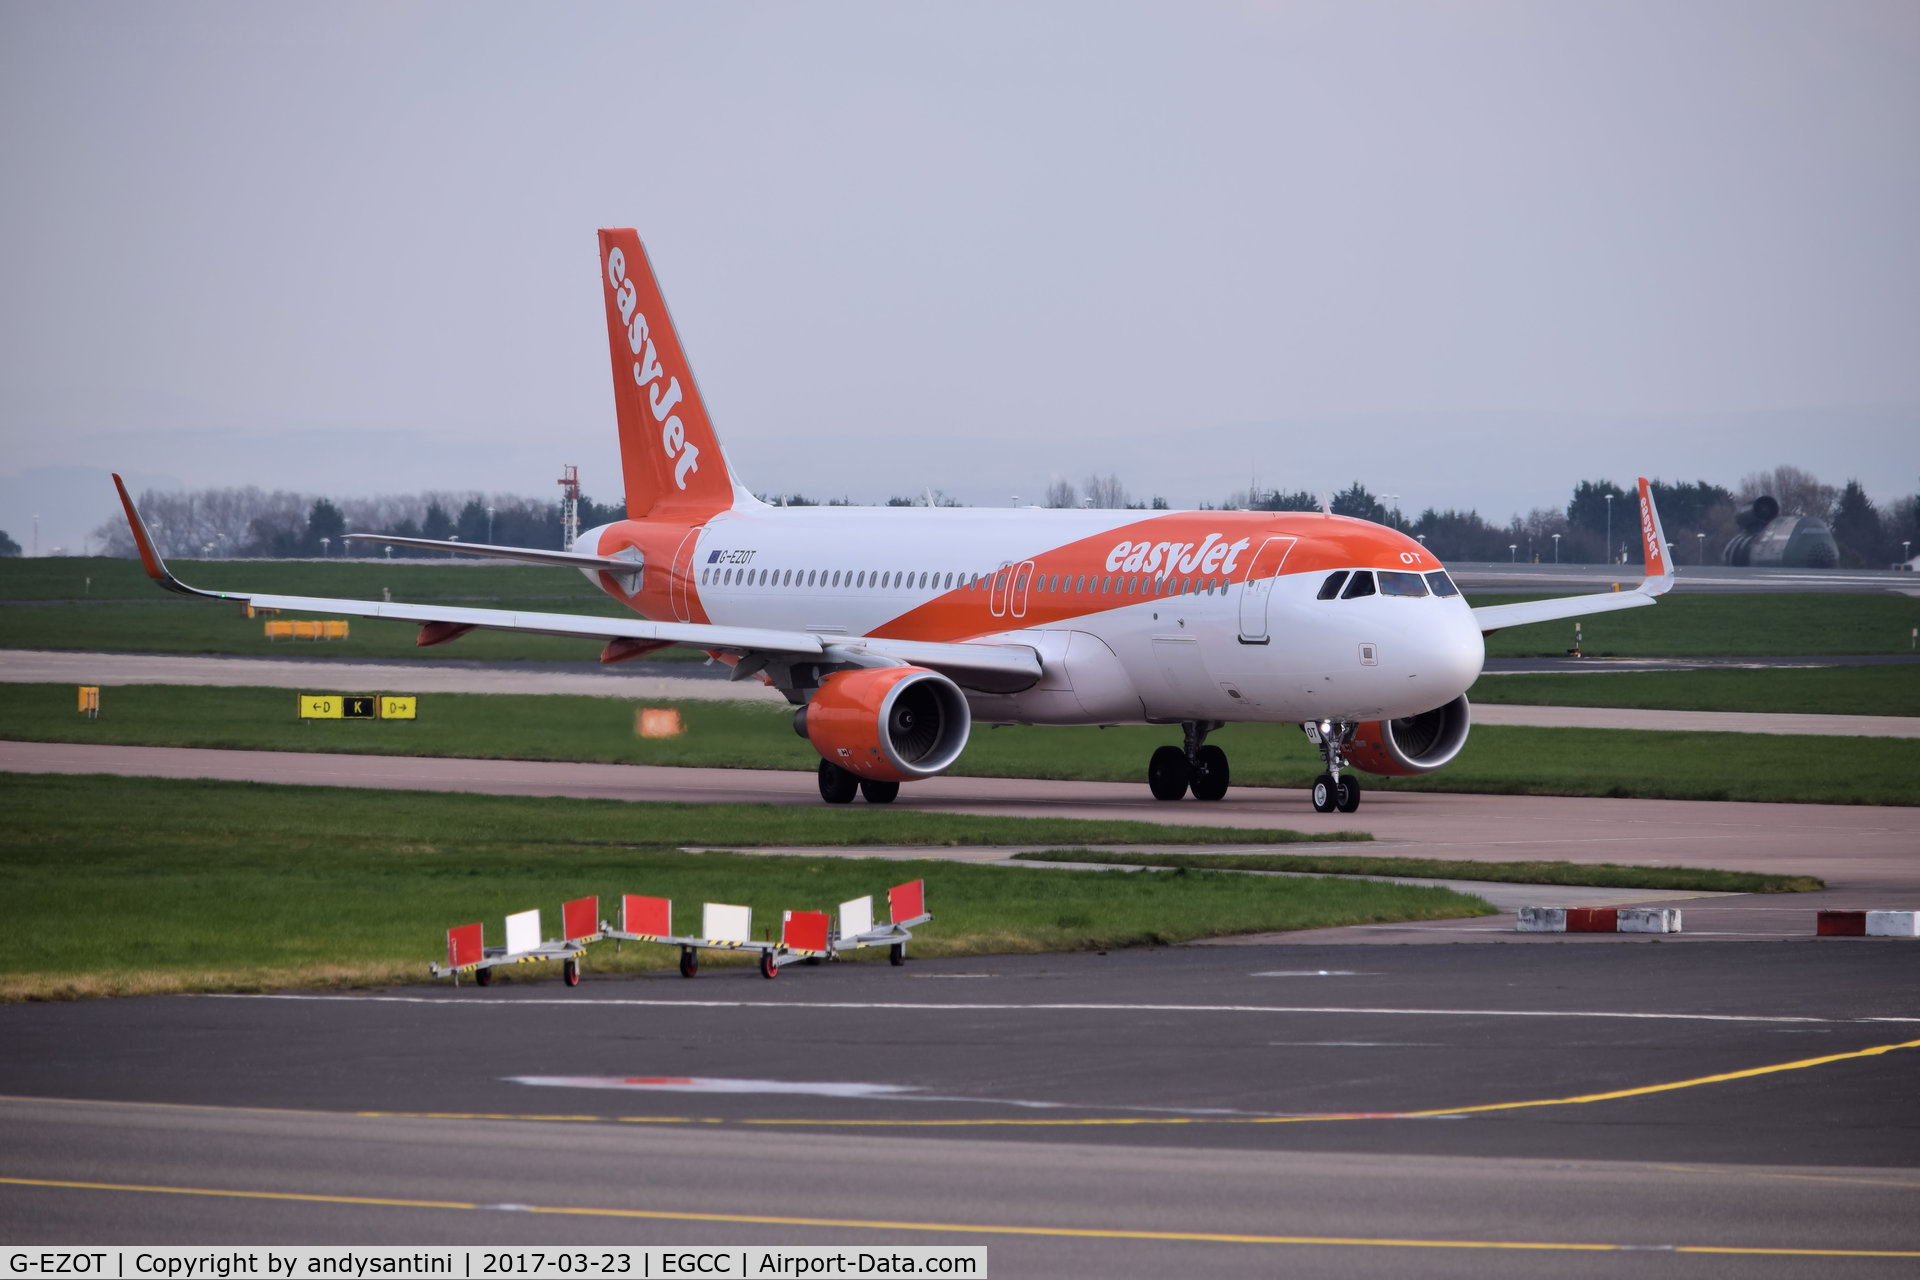 G-EZOT, 2015 Airbus A320-214 C/N 6680, taxing out for take off